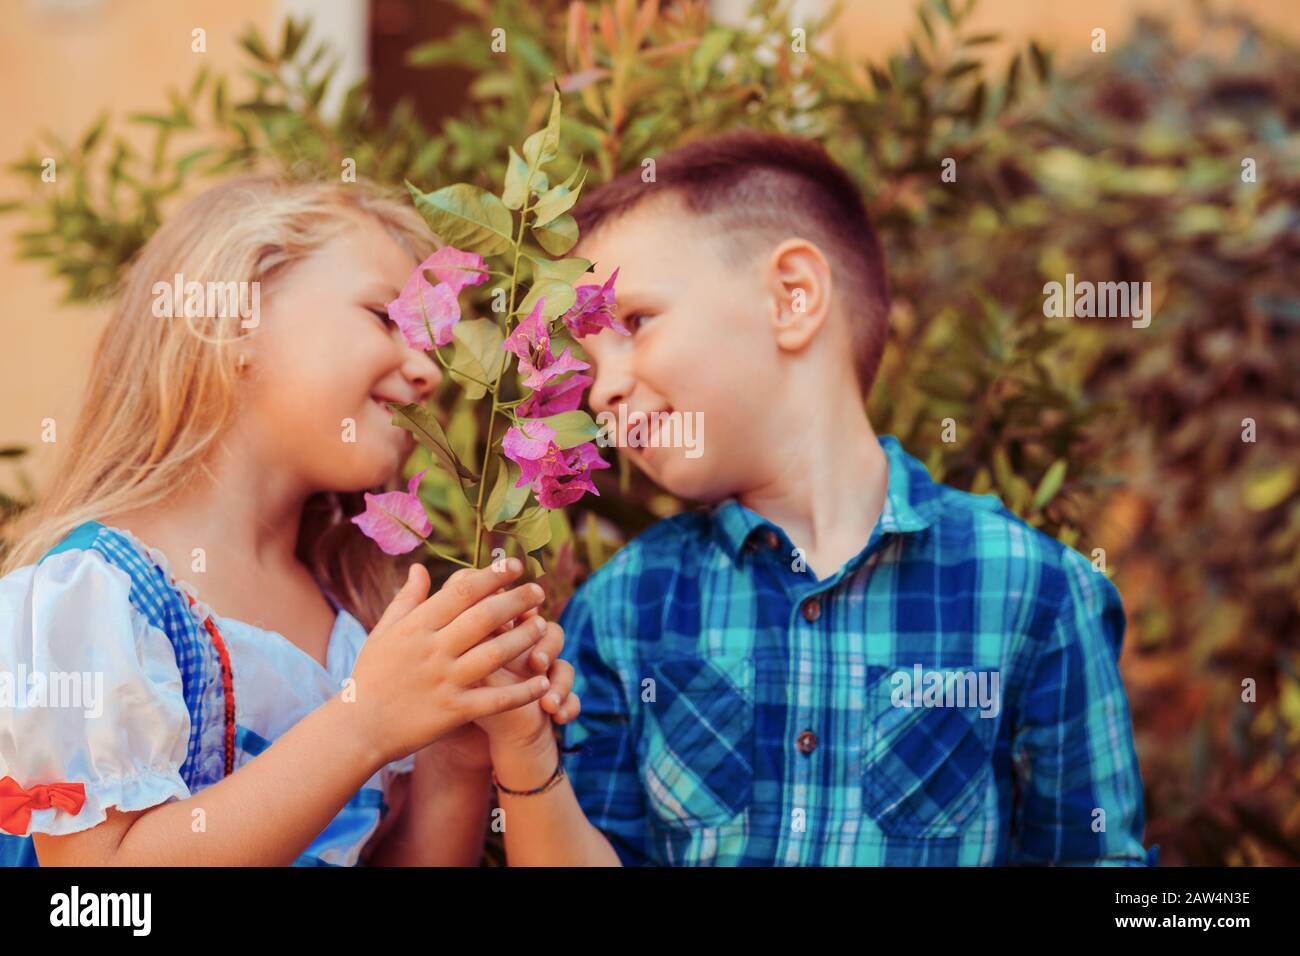 Two children smell the flowers green tree background. Boy brother gives a flower to the girl sister. Love care concept Stock Photo